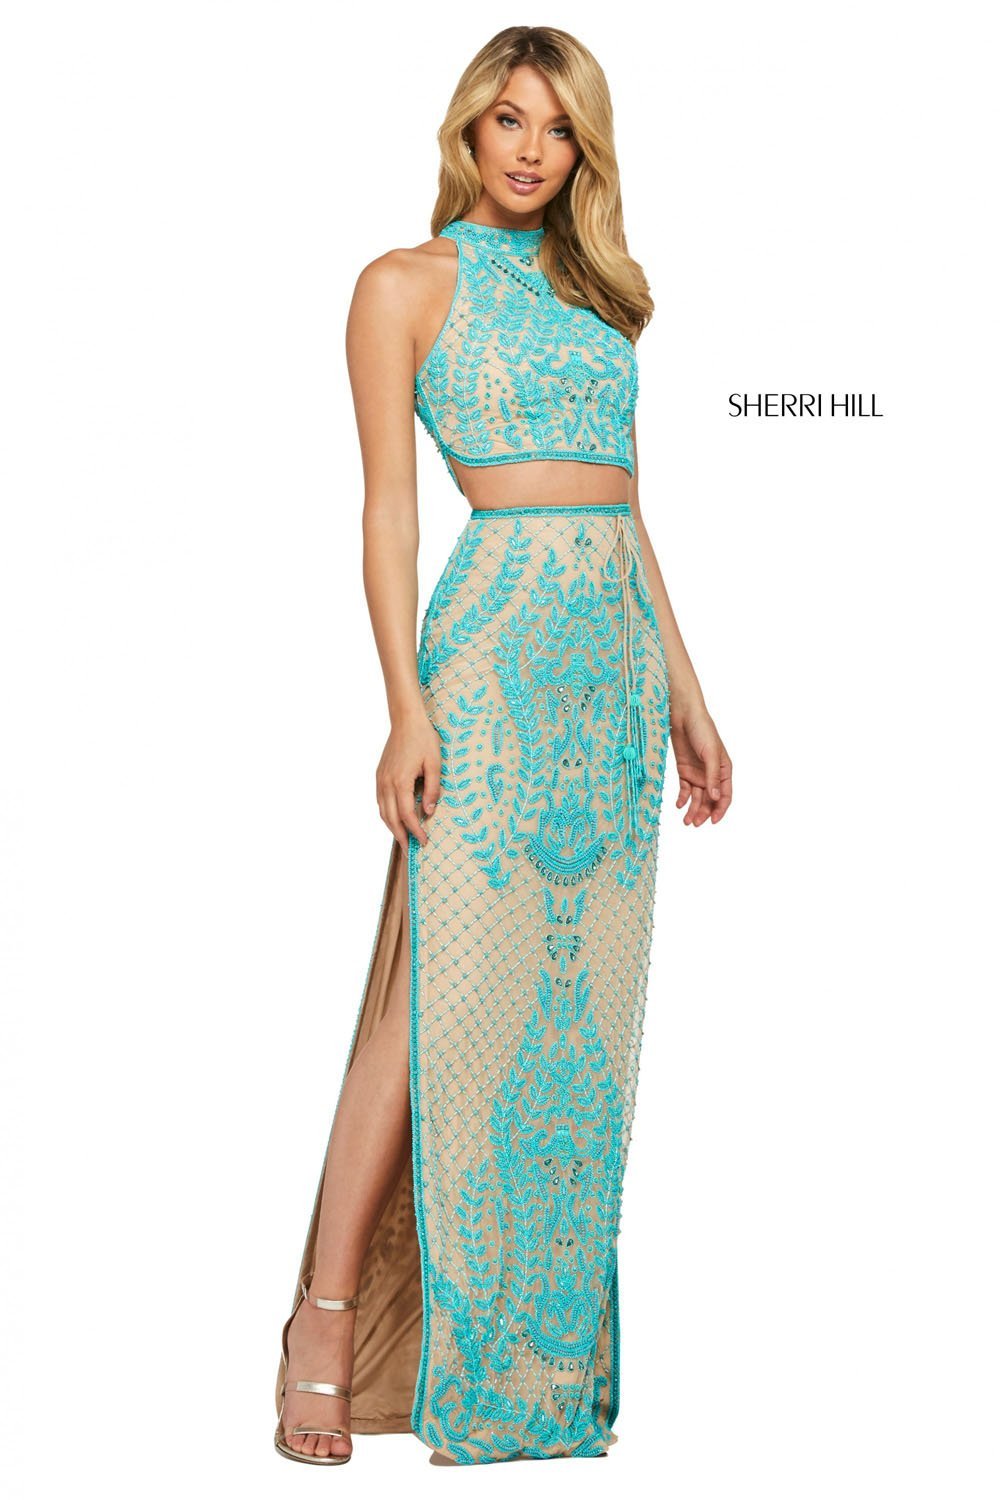 Sherri Hill 53436 dress images in these colors: Nude Ivory, Nude Turquoise, Pink, Coral, Yellow, Aqua.